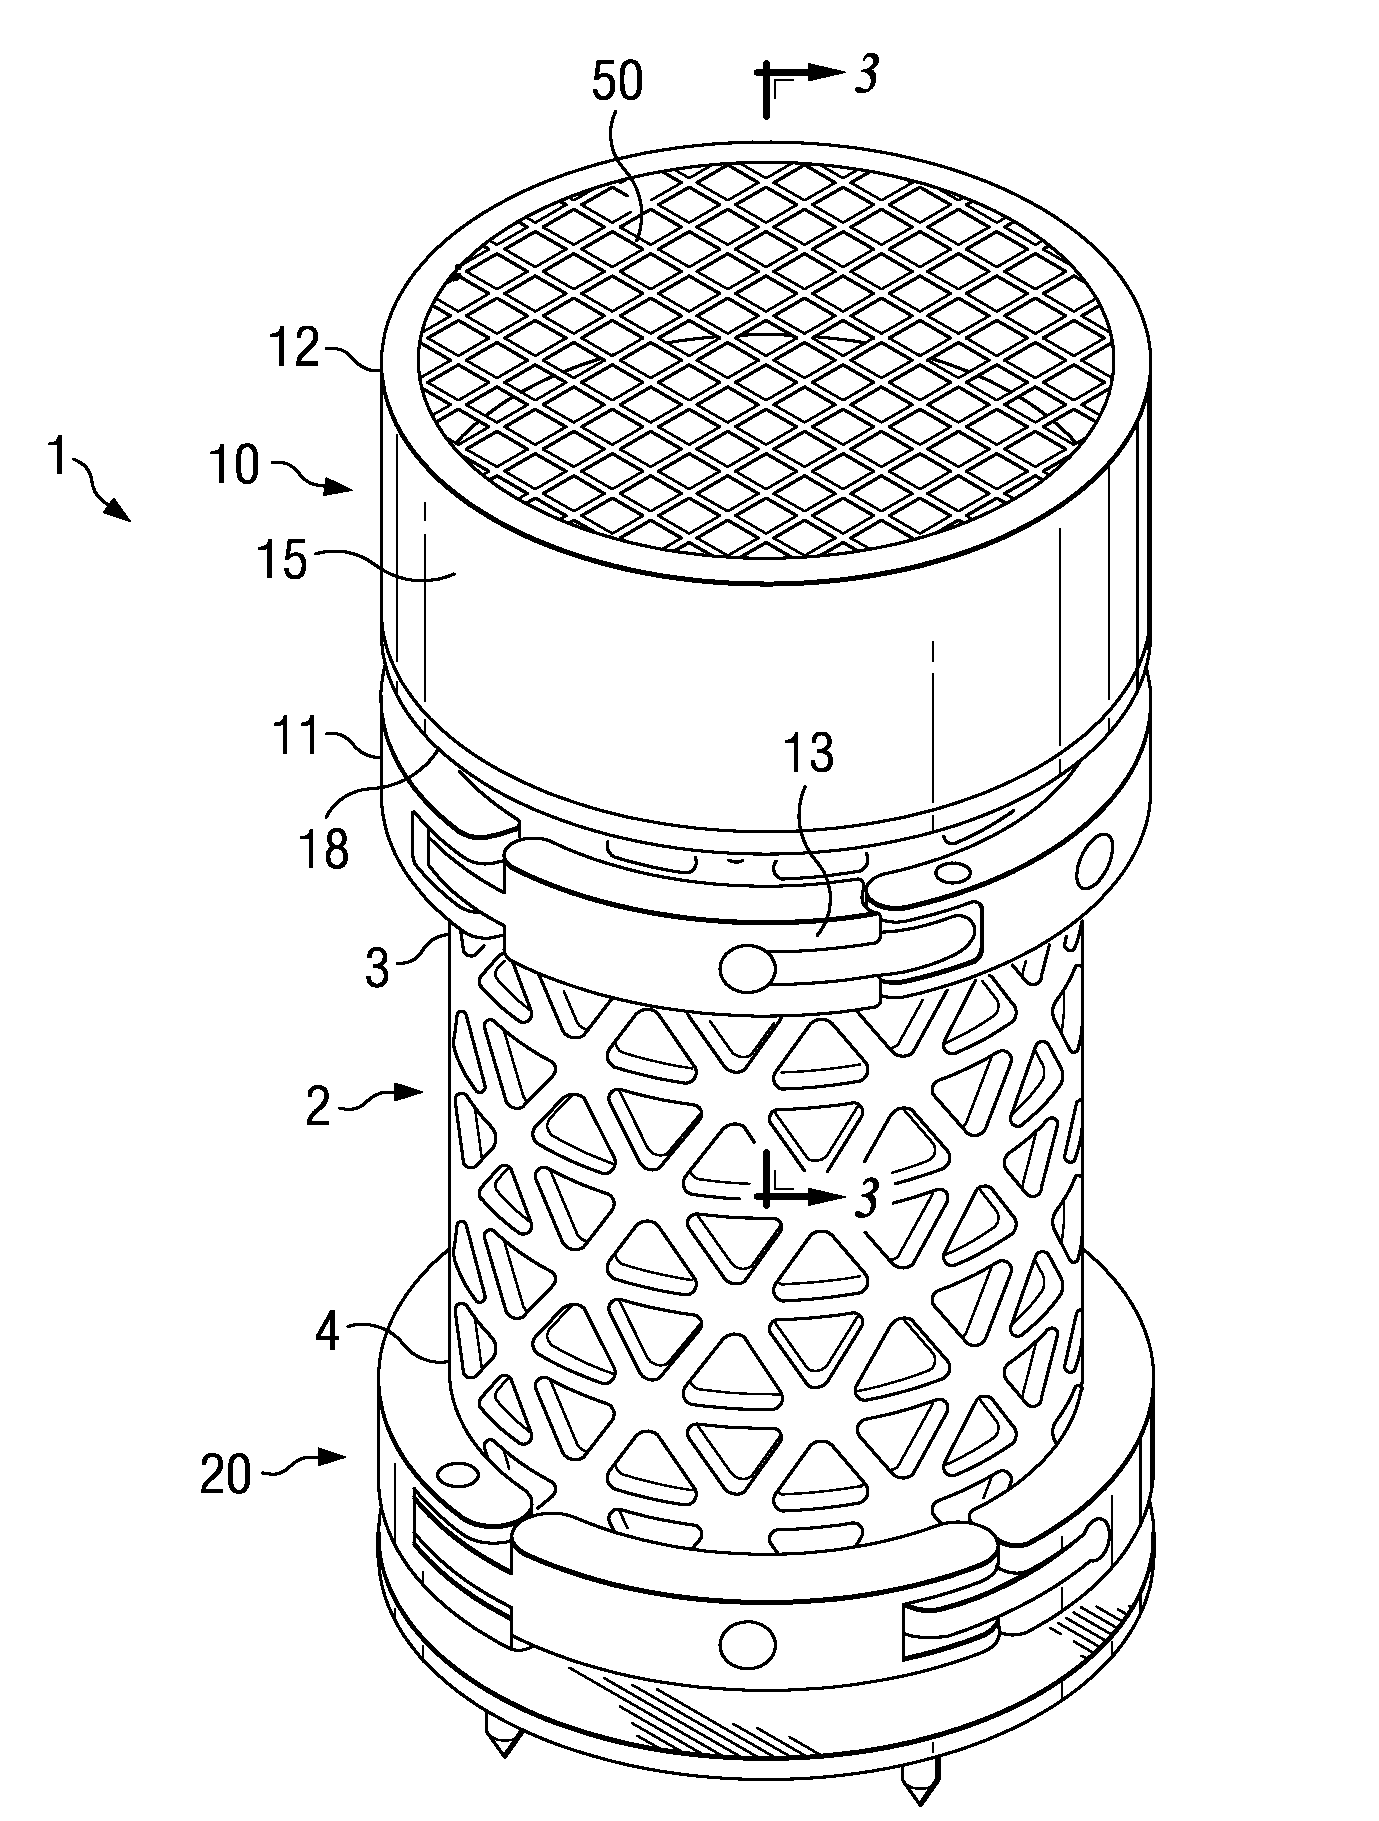 Spinal implant configured to apply radiation treatment and method